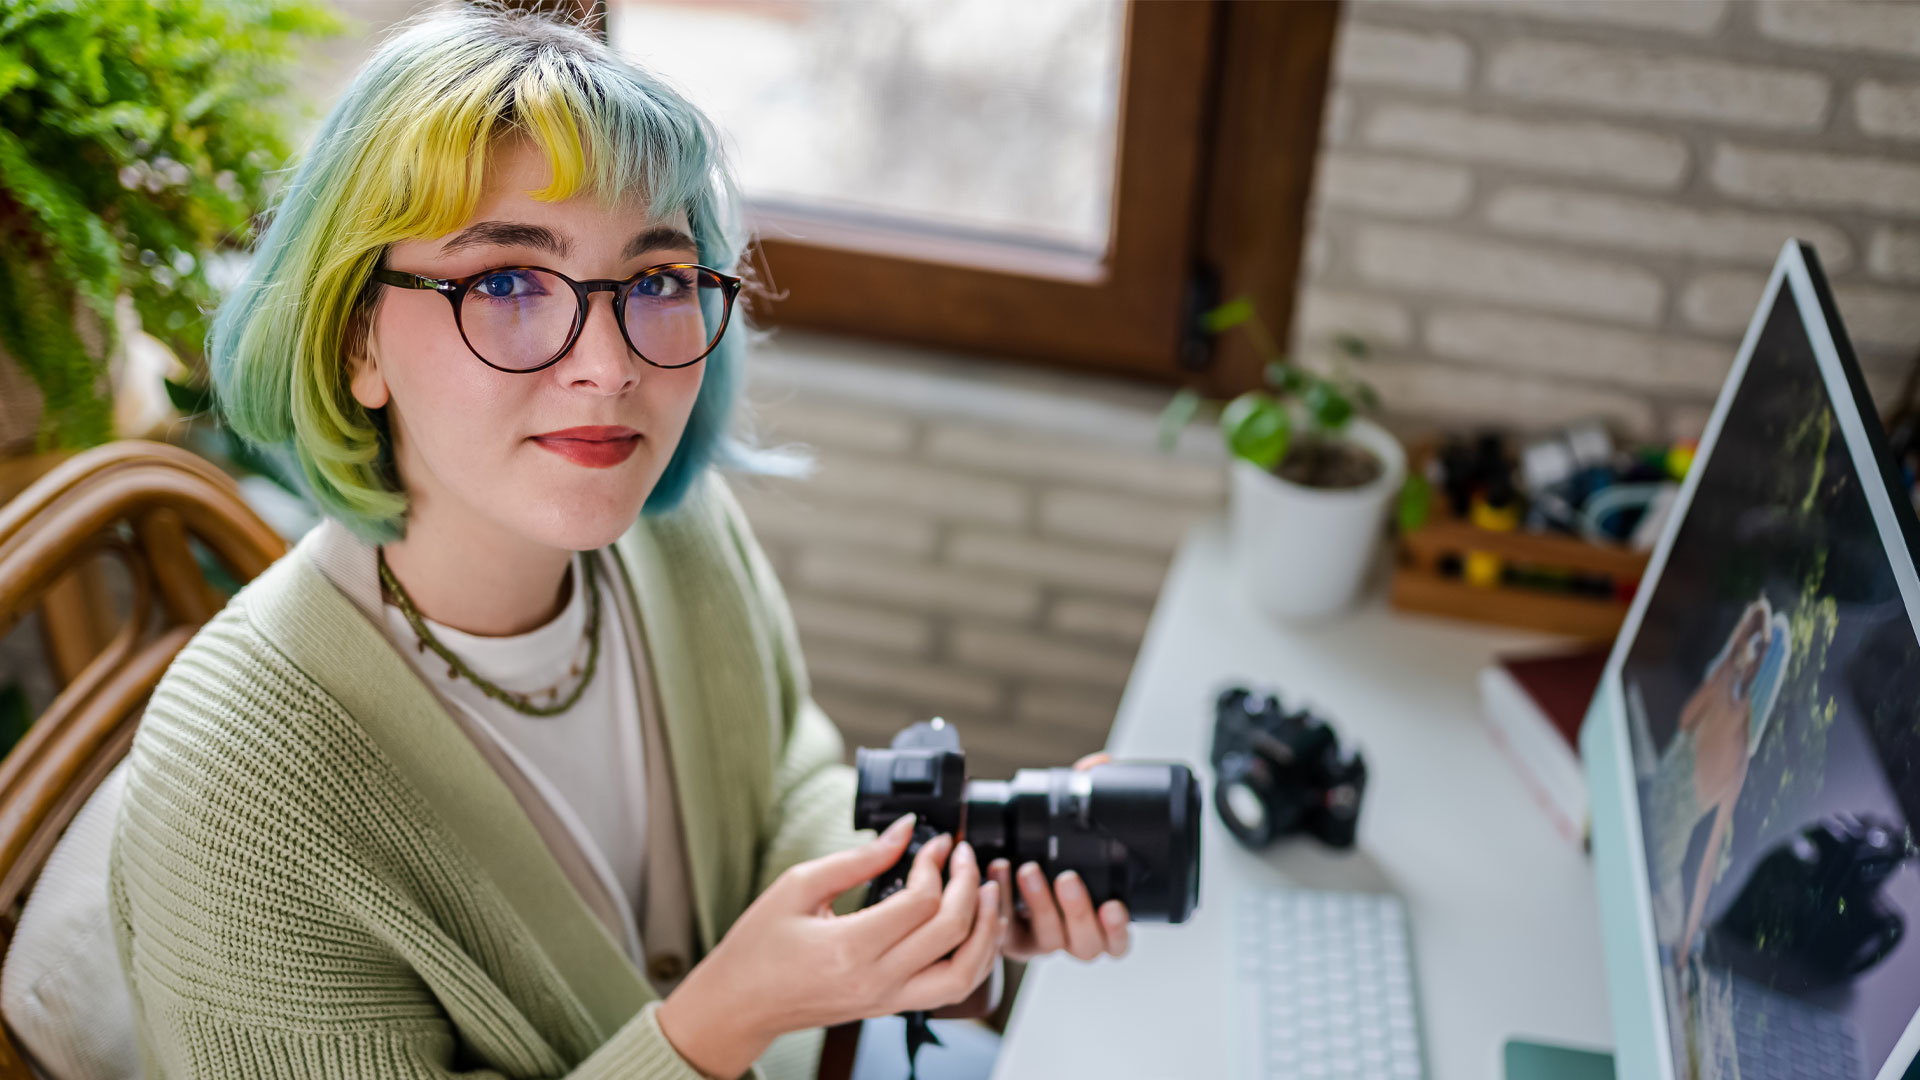 Freelance photographer holding a camera and editing photos on her laptop.